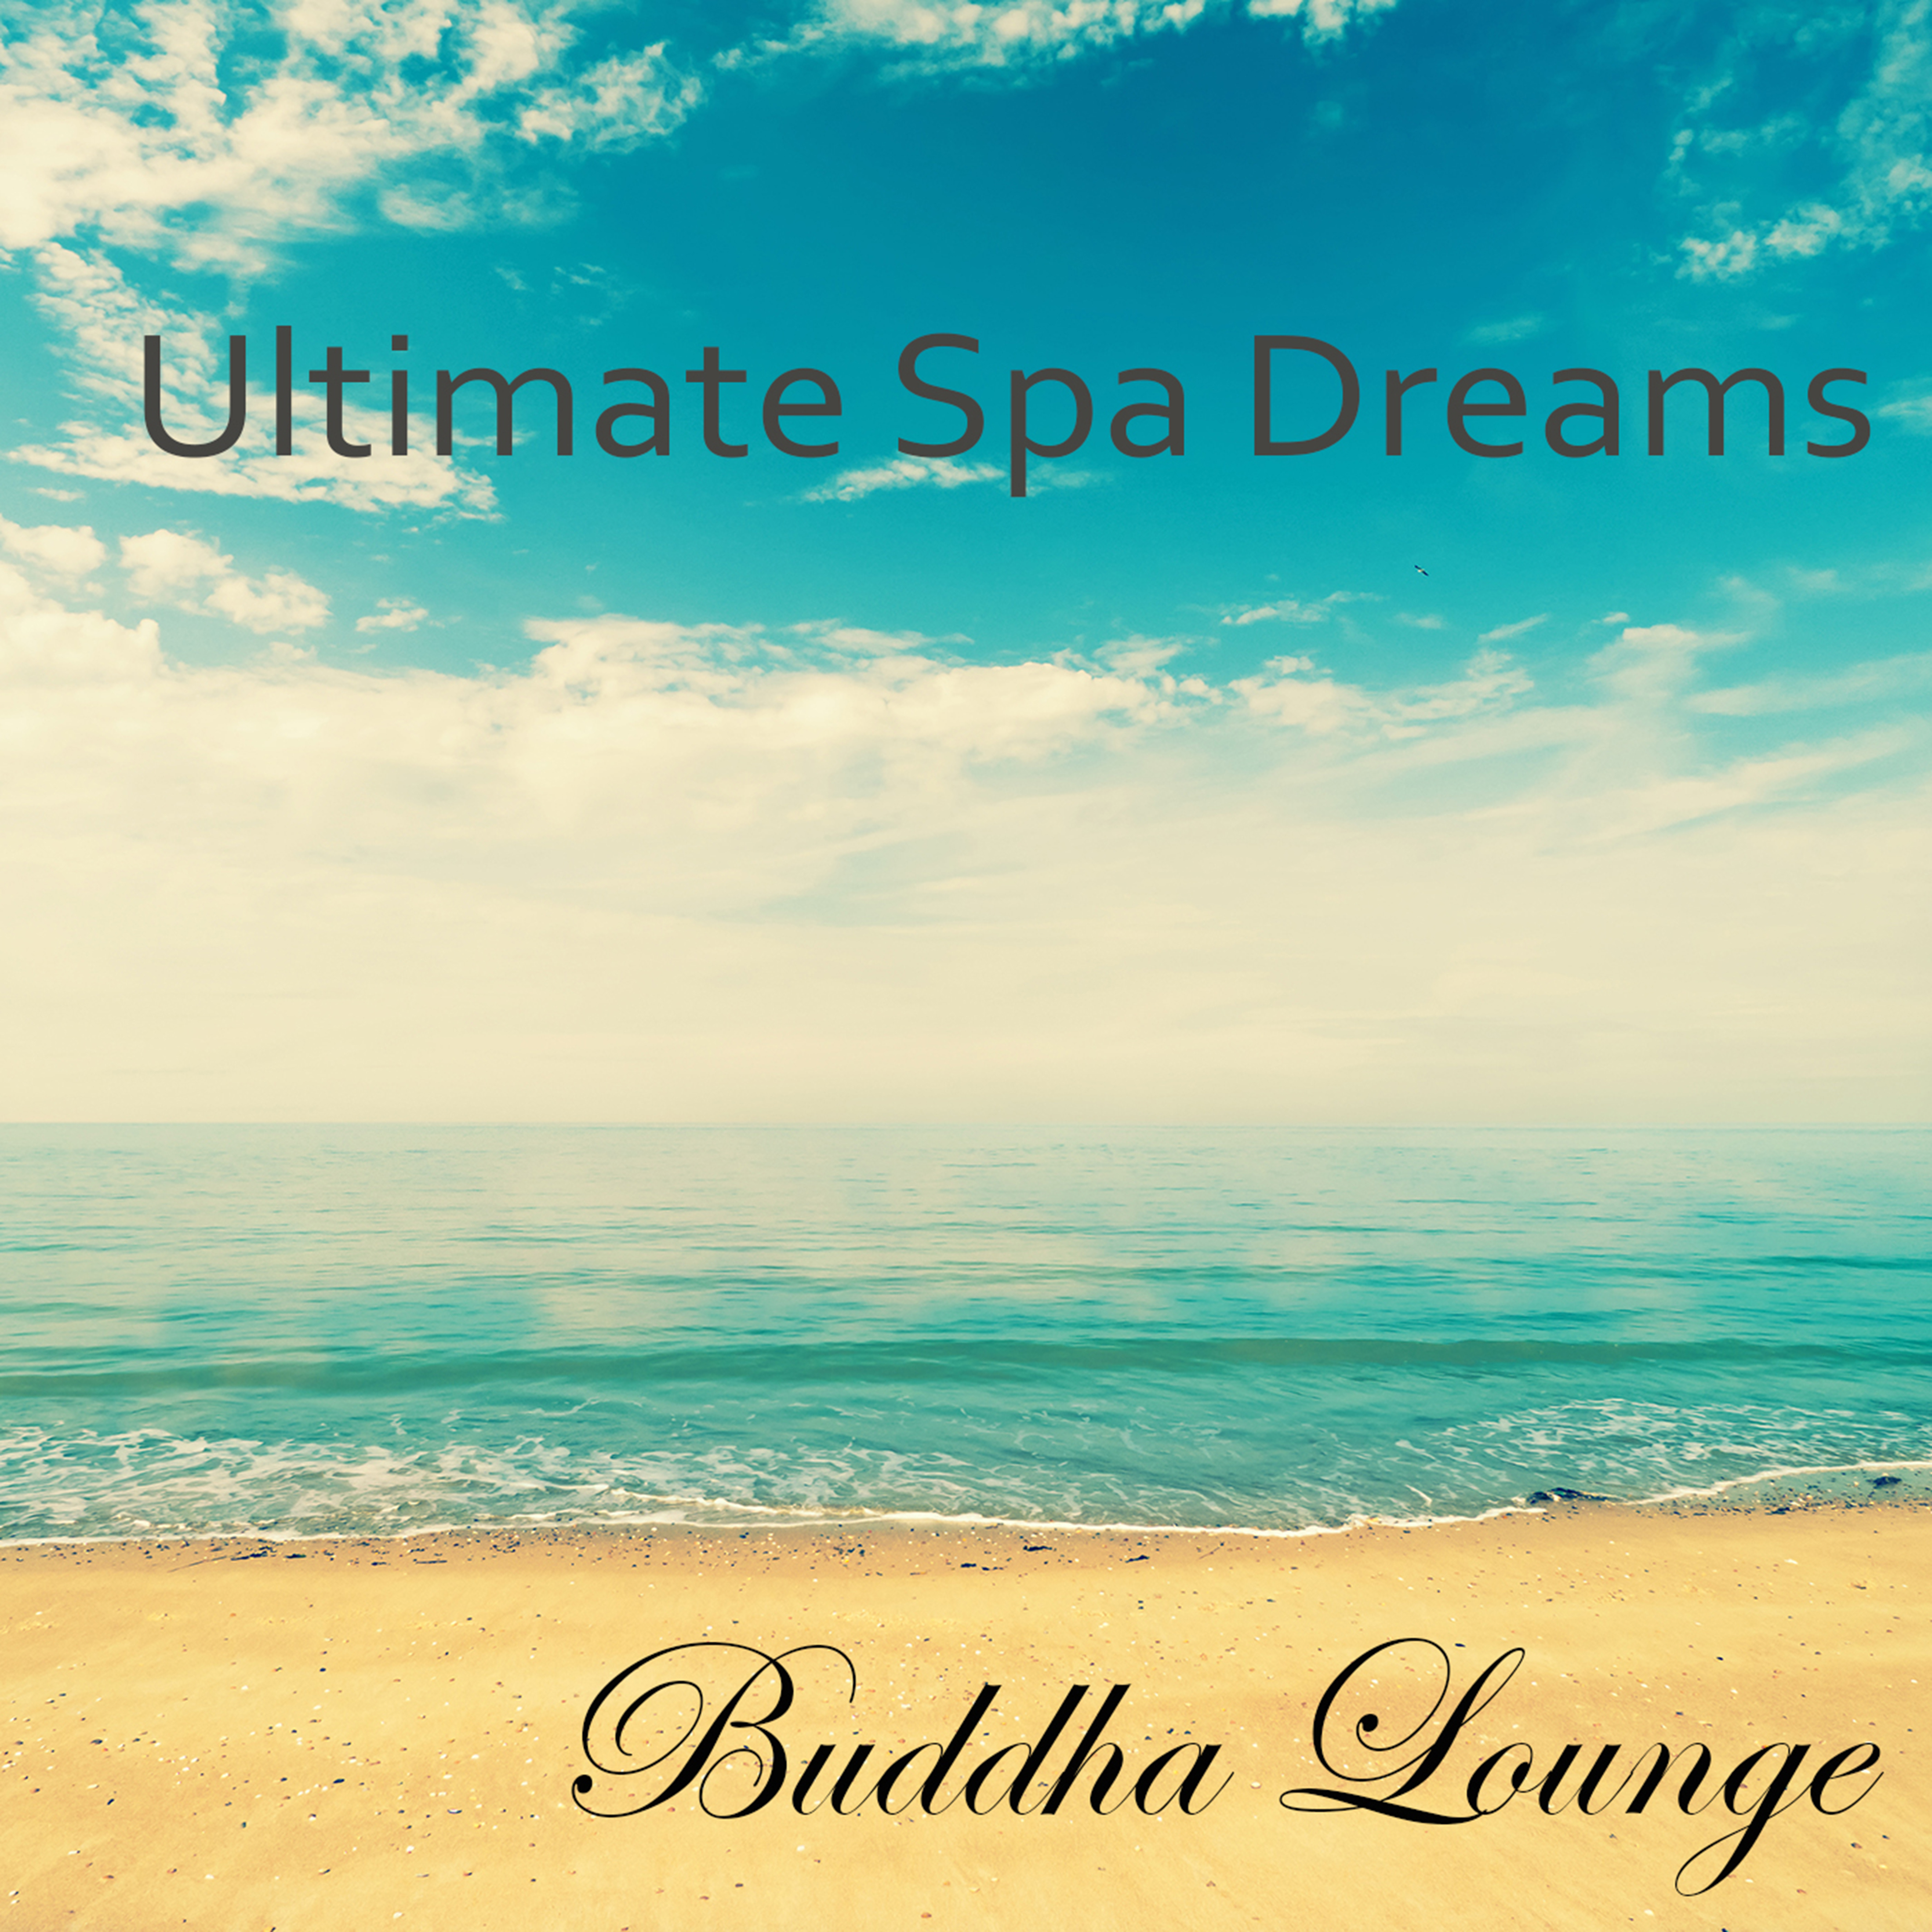 Ultimate Spa Dreams Buddha Lounge Music and Relaxation Meditation Lounge Bar Chill Music Selection